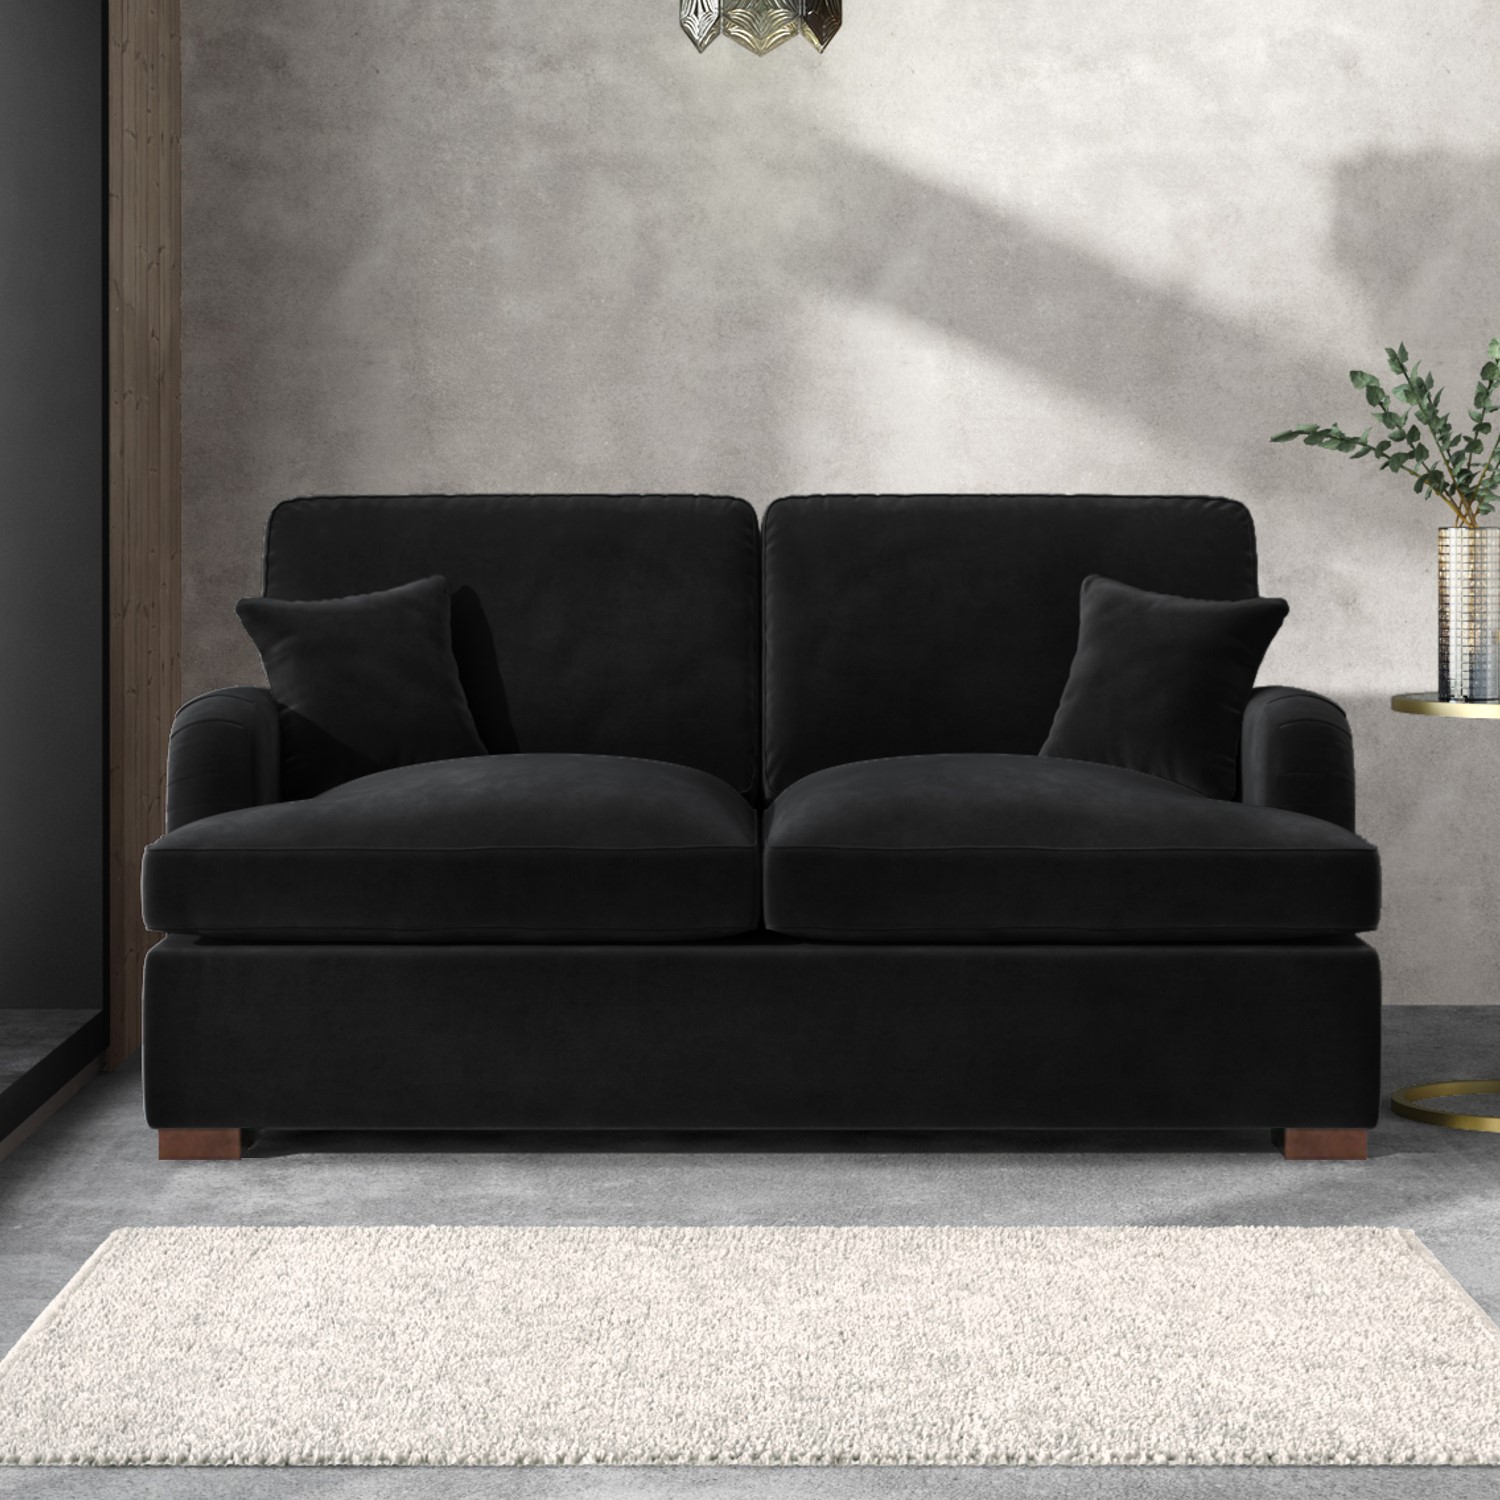 Photo of Black velvet pull out sofa bed - seats 2 - payton